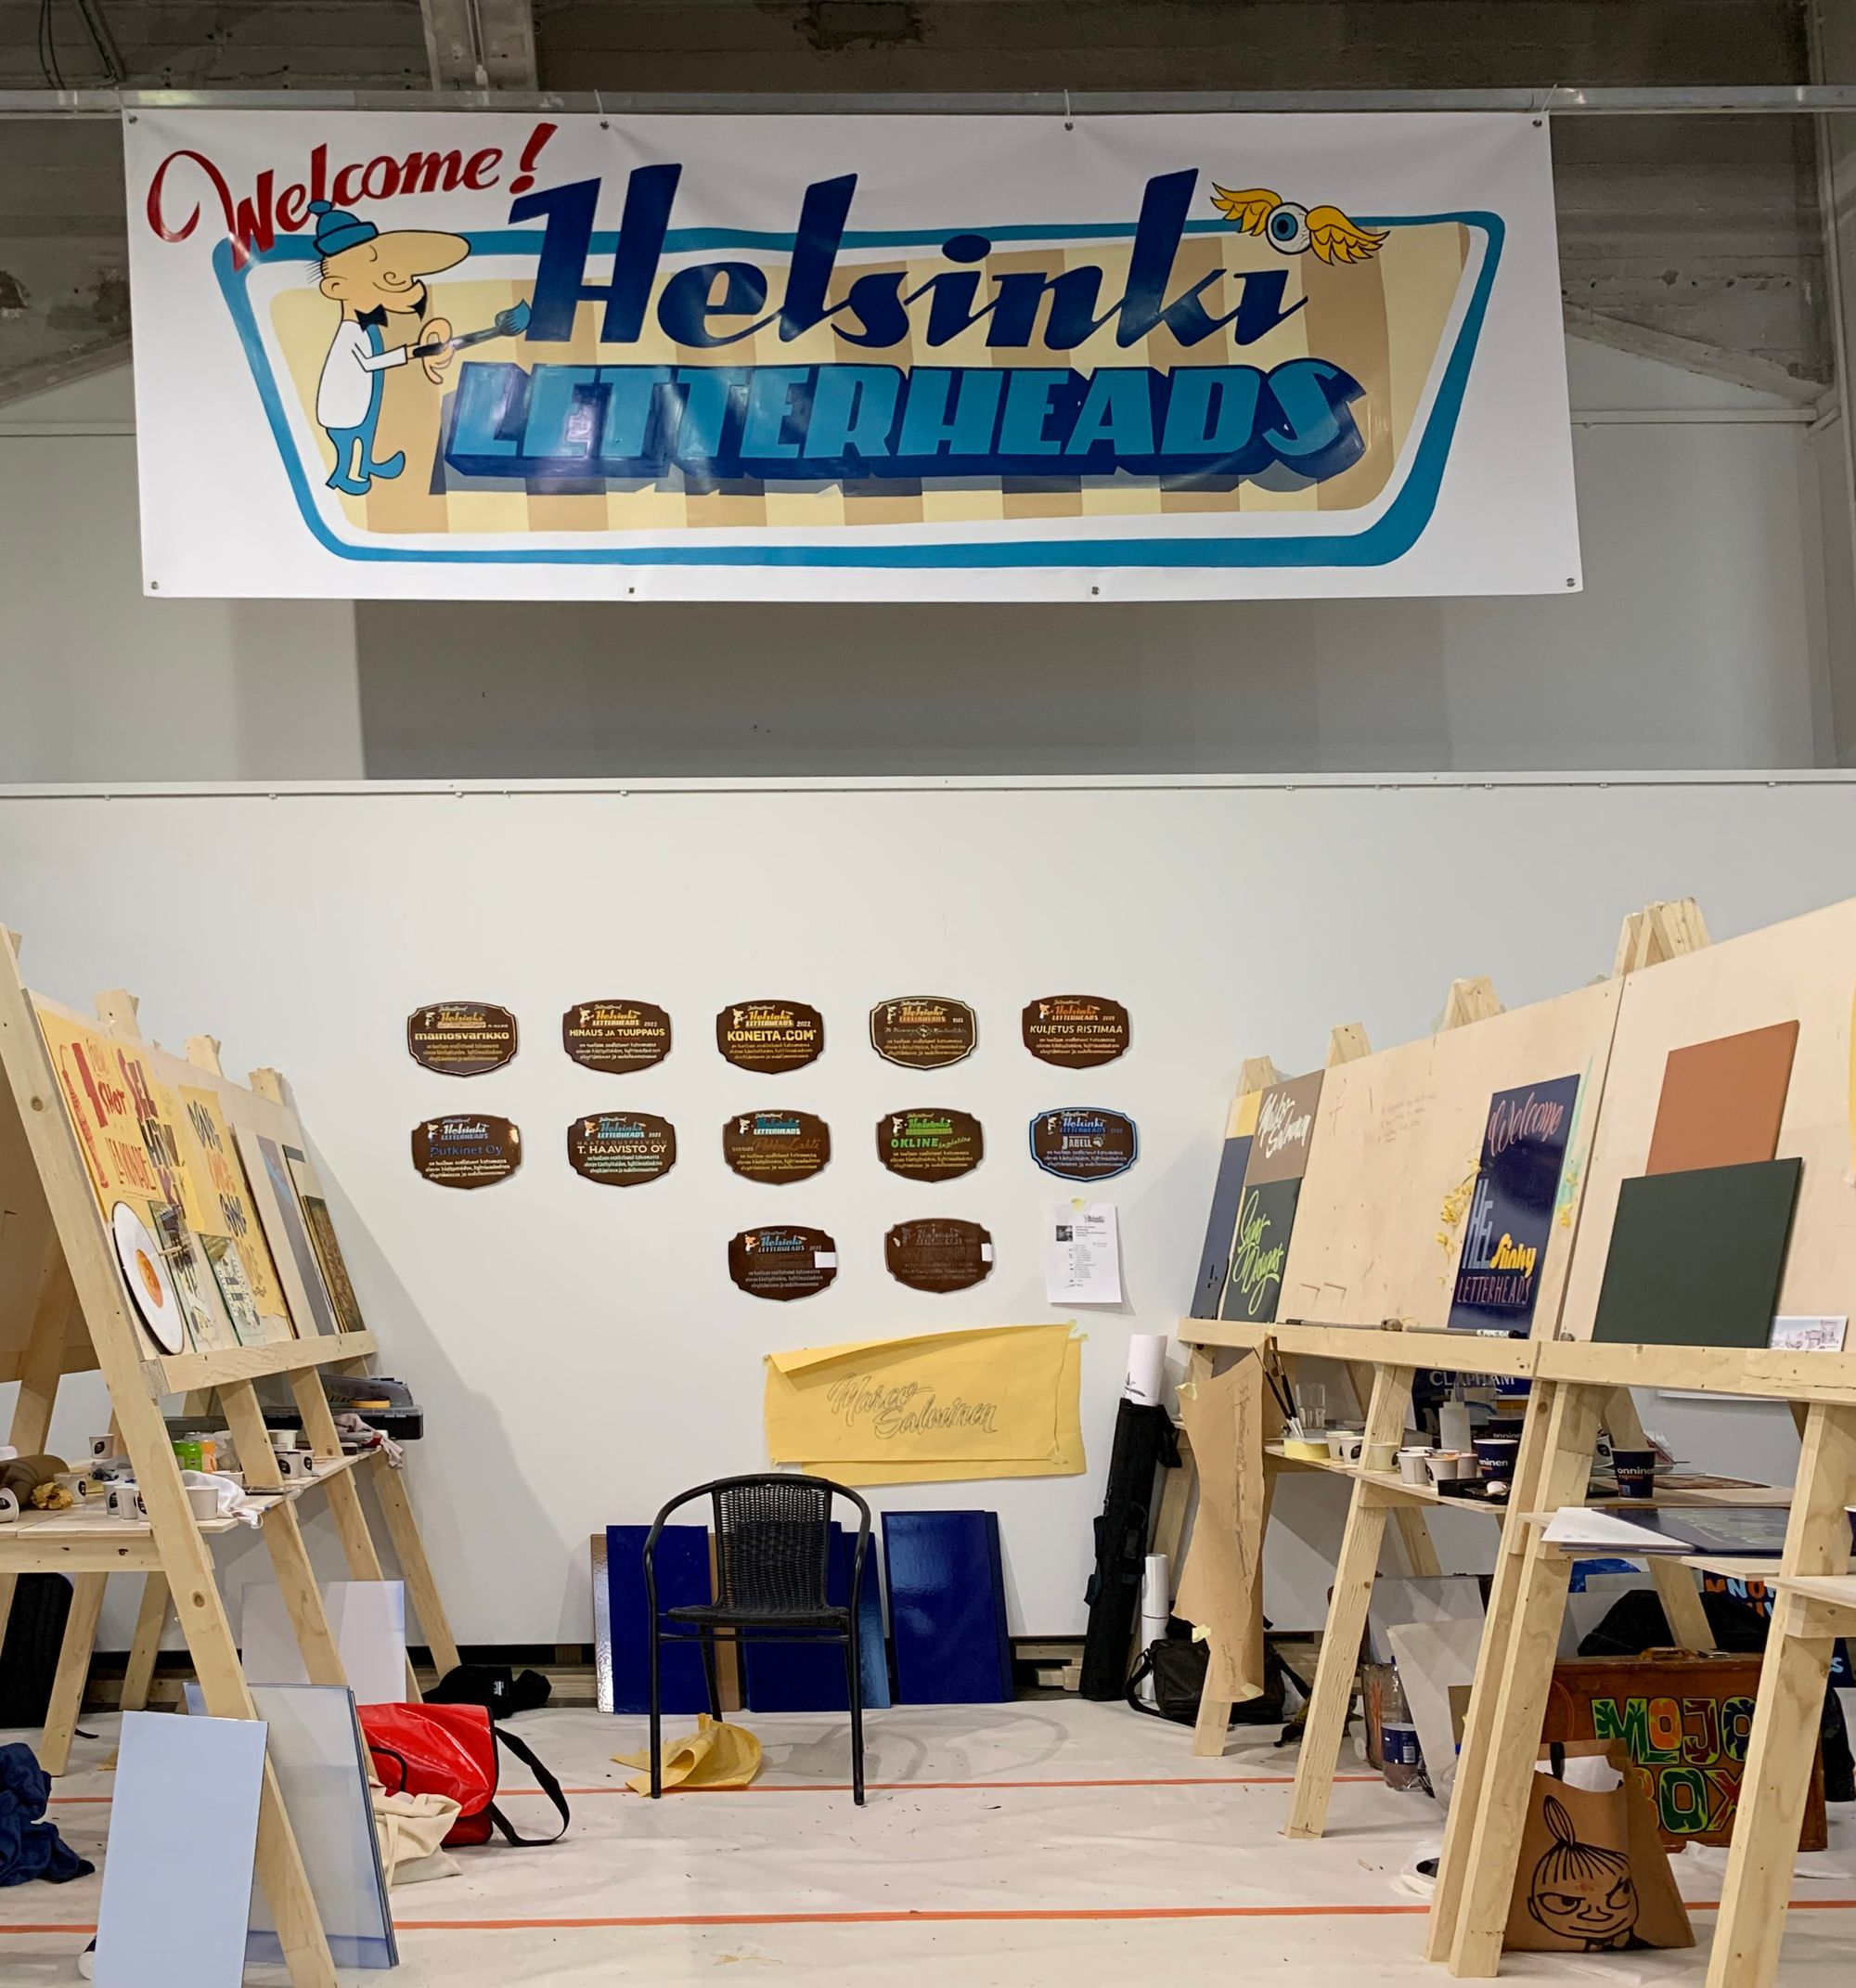 Array of easels and a hand-painted 'Welcome Helsinki Letterheads' sign.